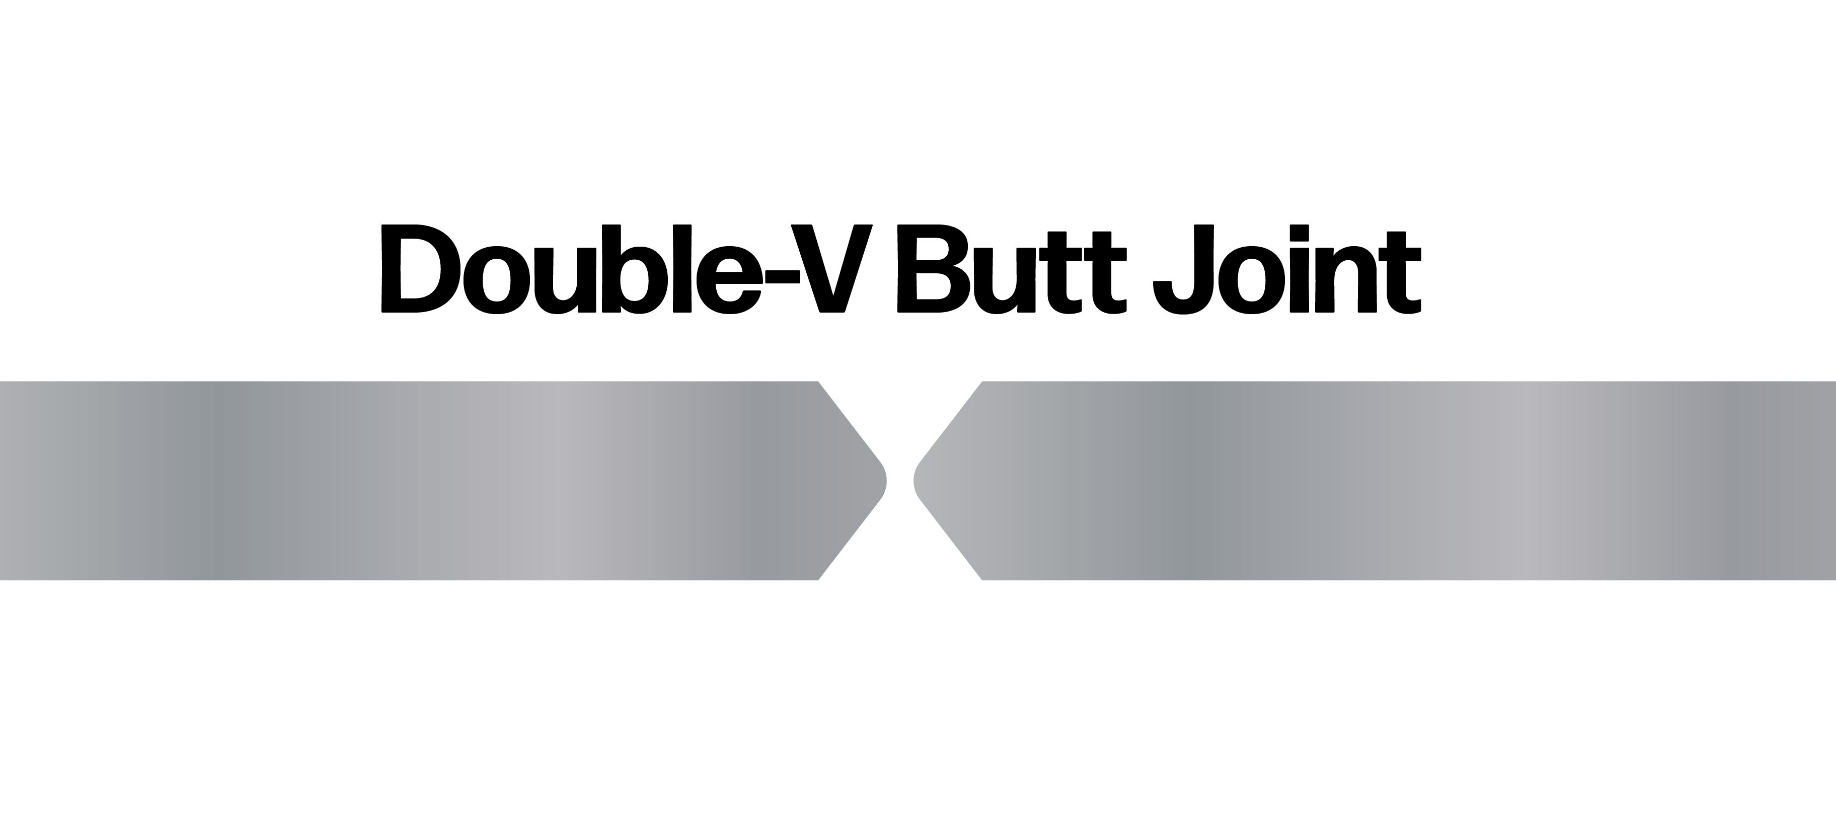 Double V Butt Joint Graphic